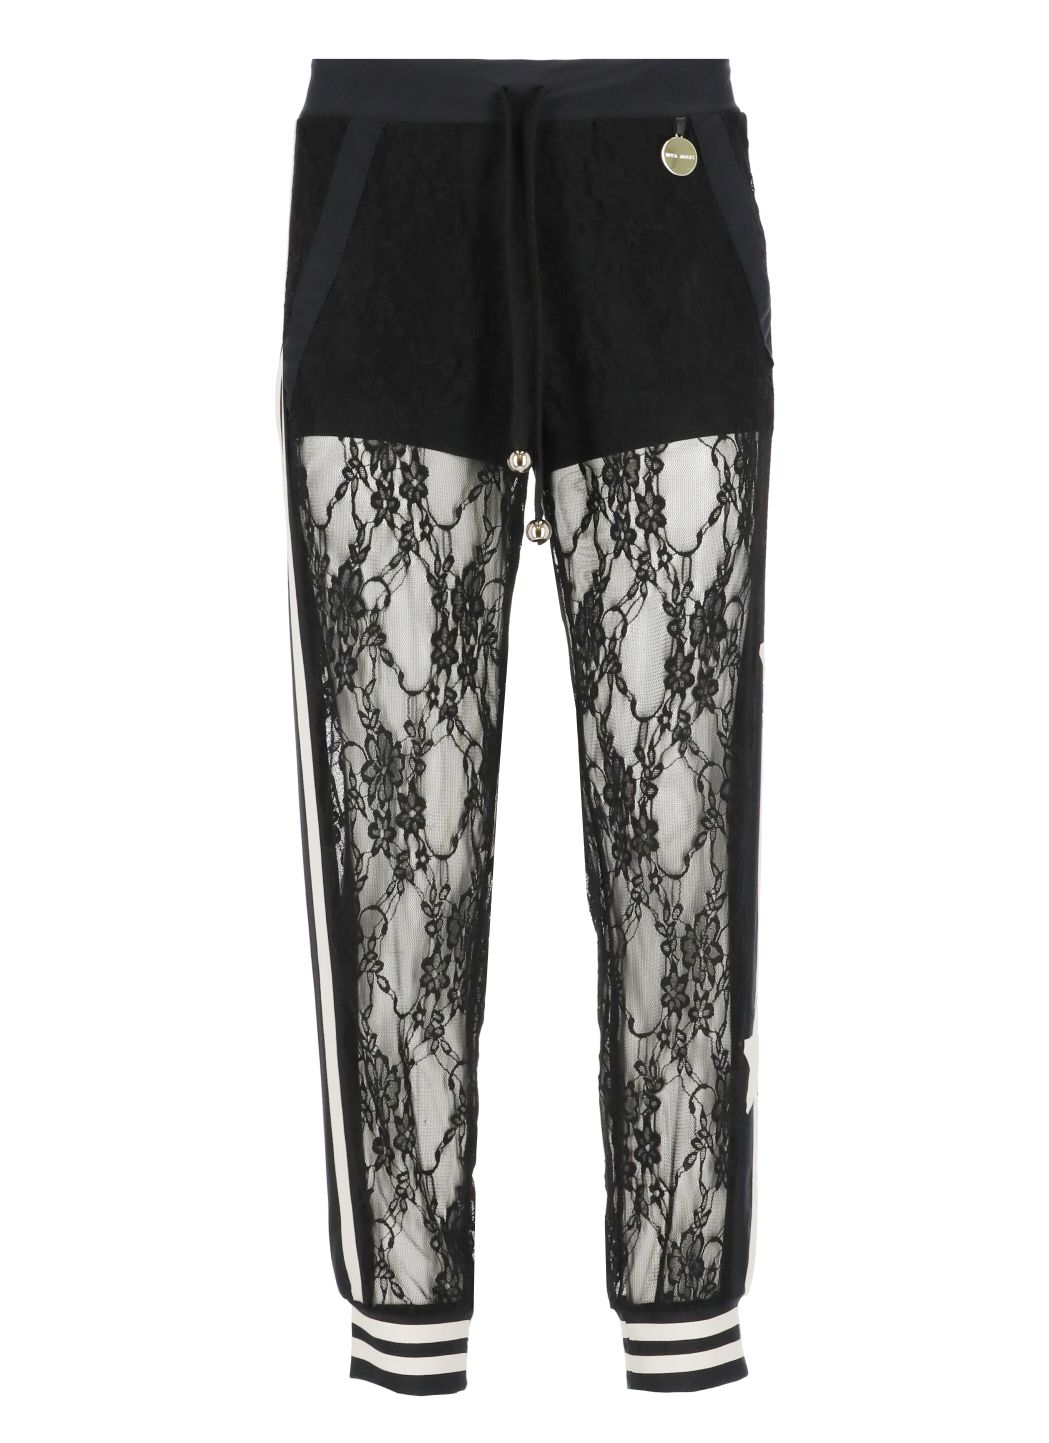 Catenelle Pizzo Pants